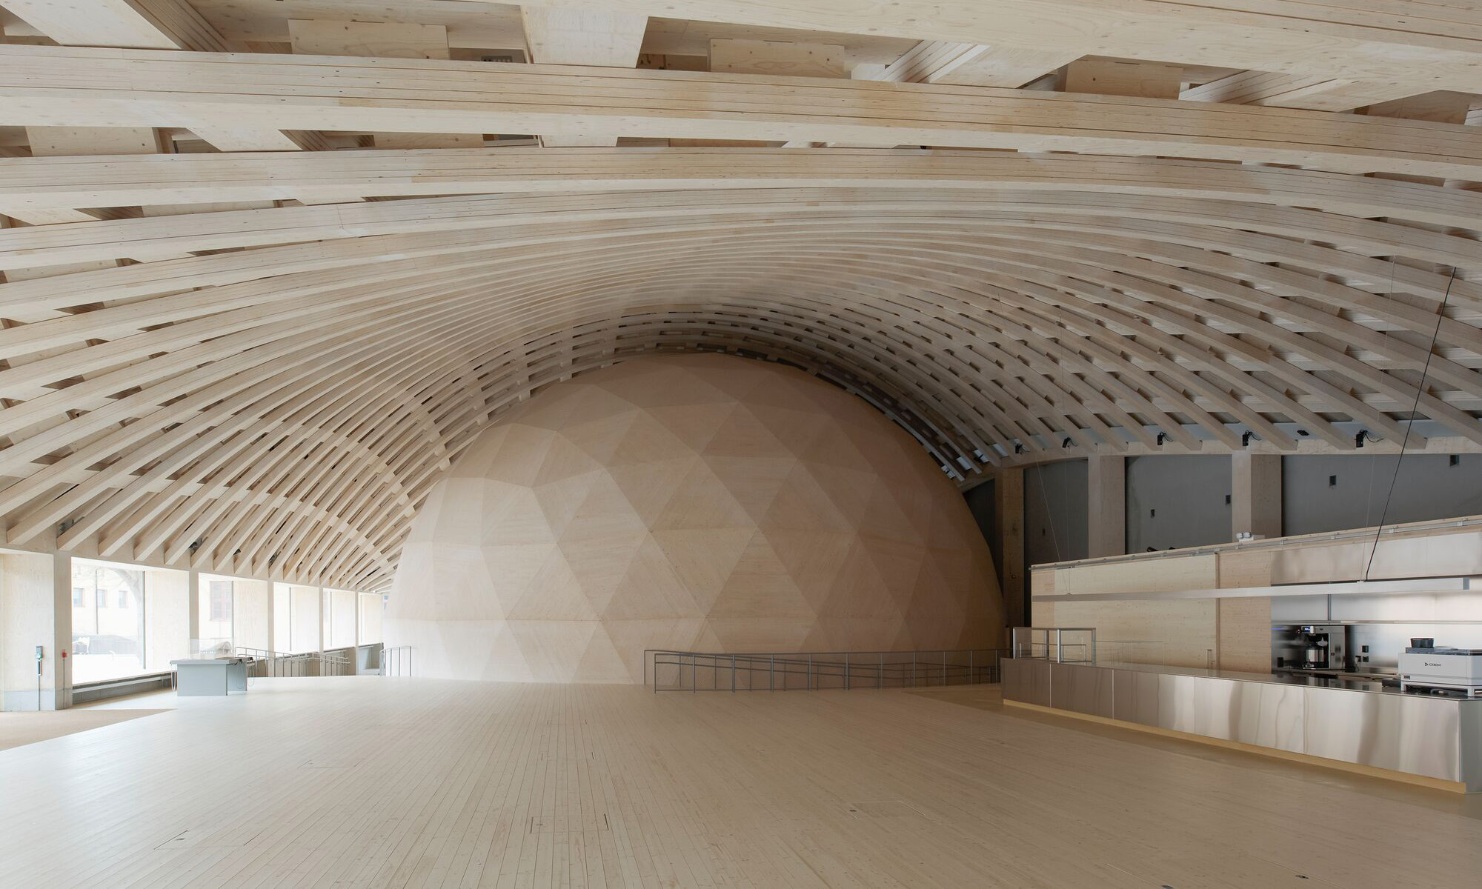 Dome construction made of CLT glulam and roof construction made of LVL laminated veneer lumber